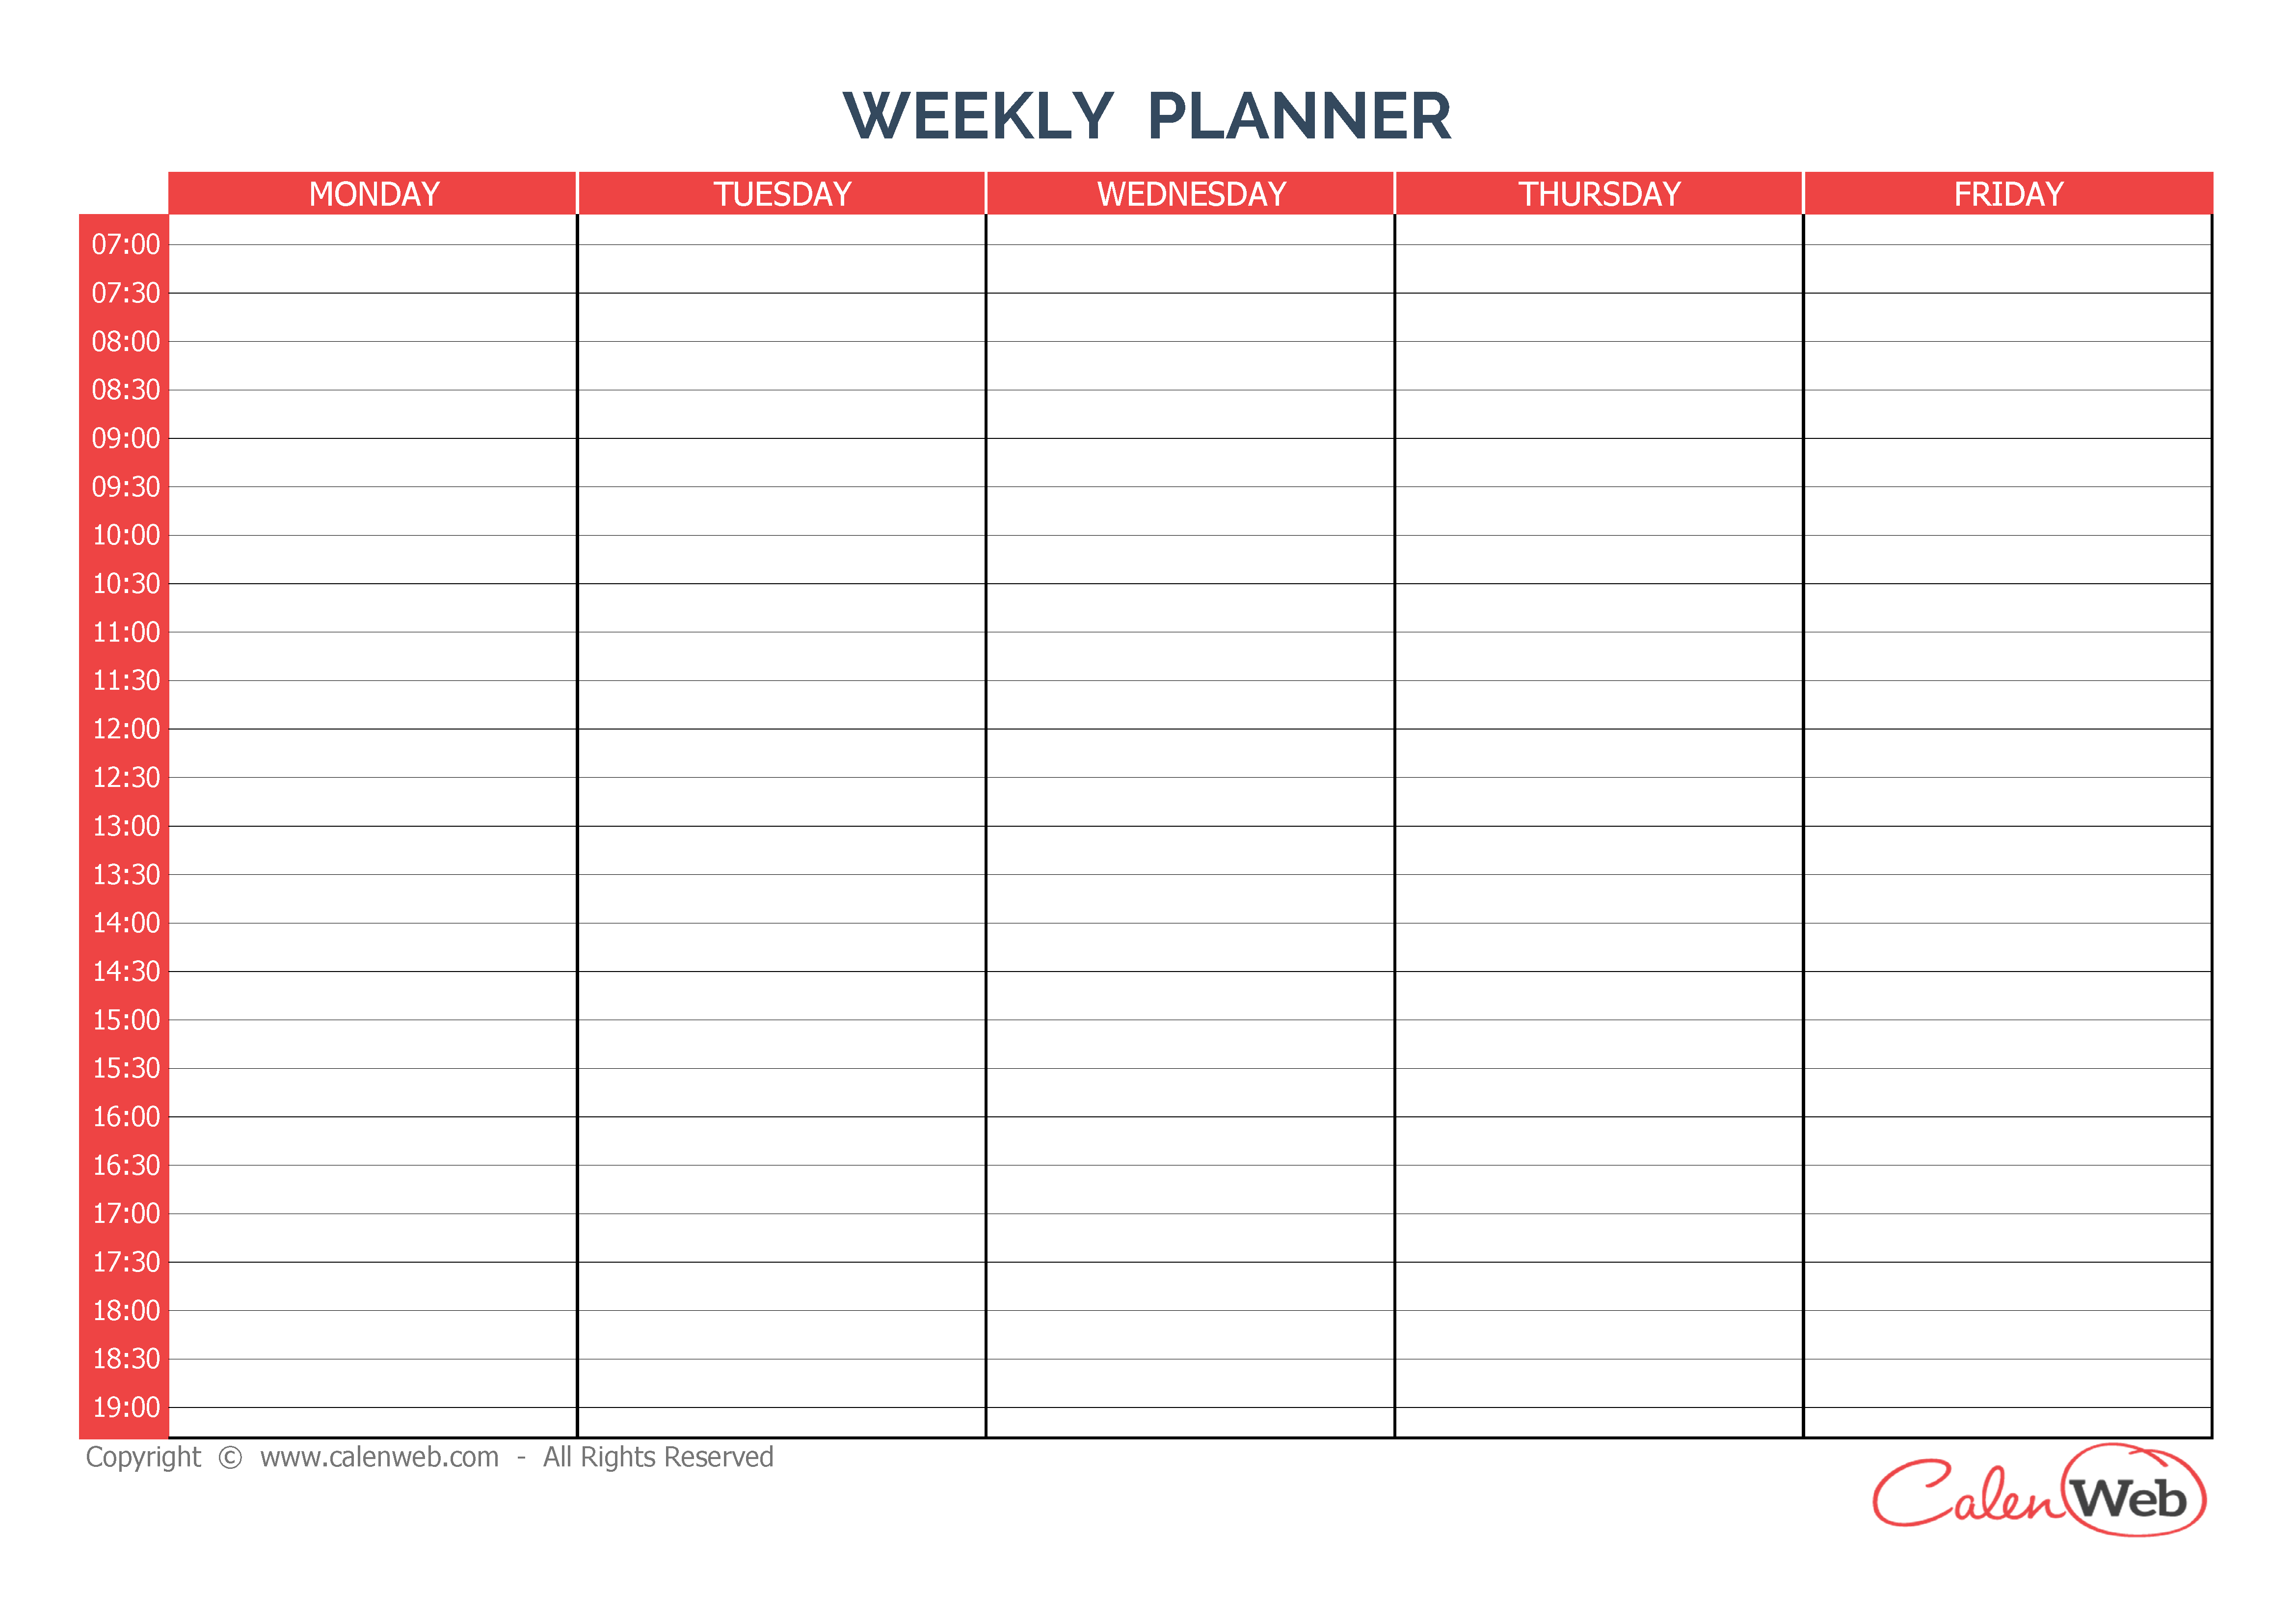 Weekly Planner 5 Days A Week Of 5 Days - Calenweb